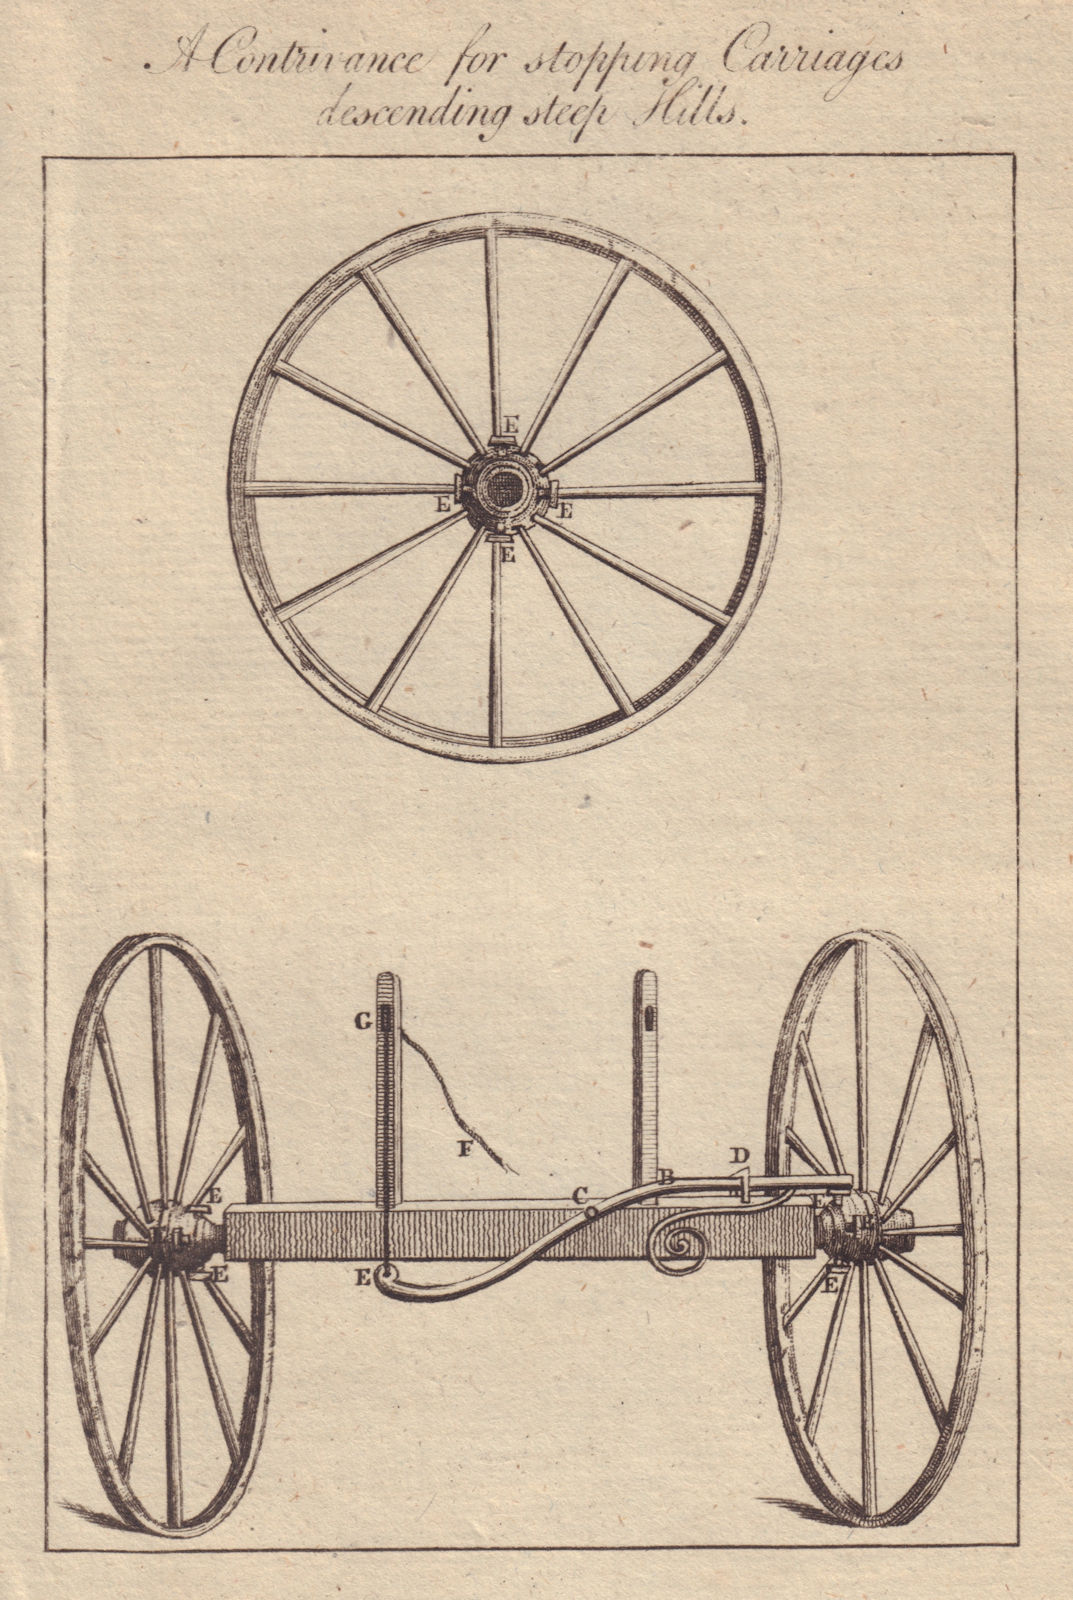 Associate Product A Contrivance for stopping Carriages descending Steep Hills. Transport 1773